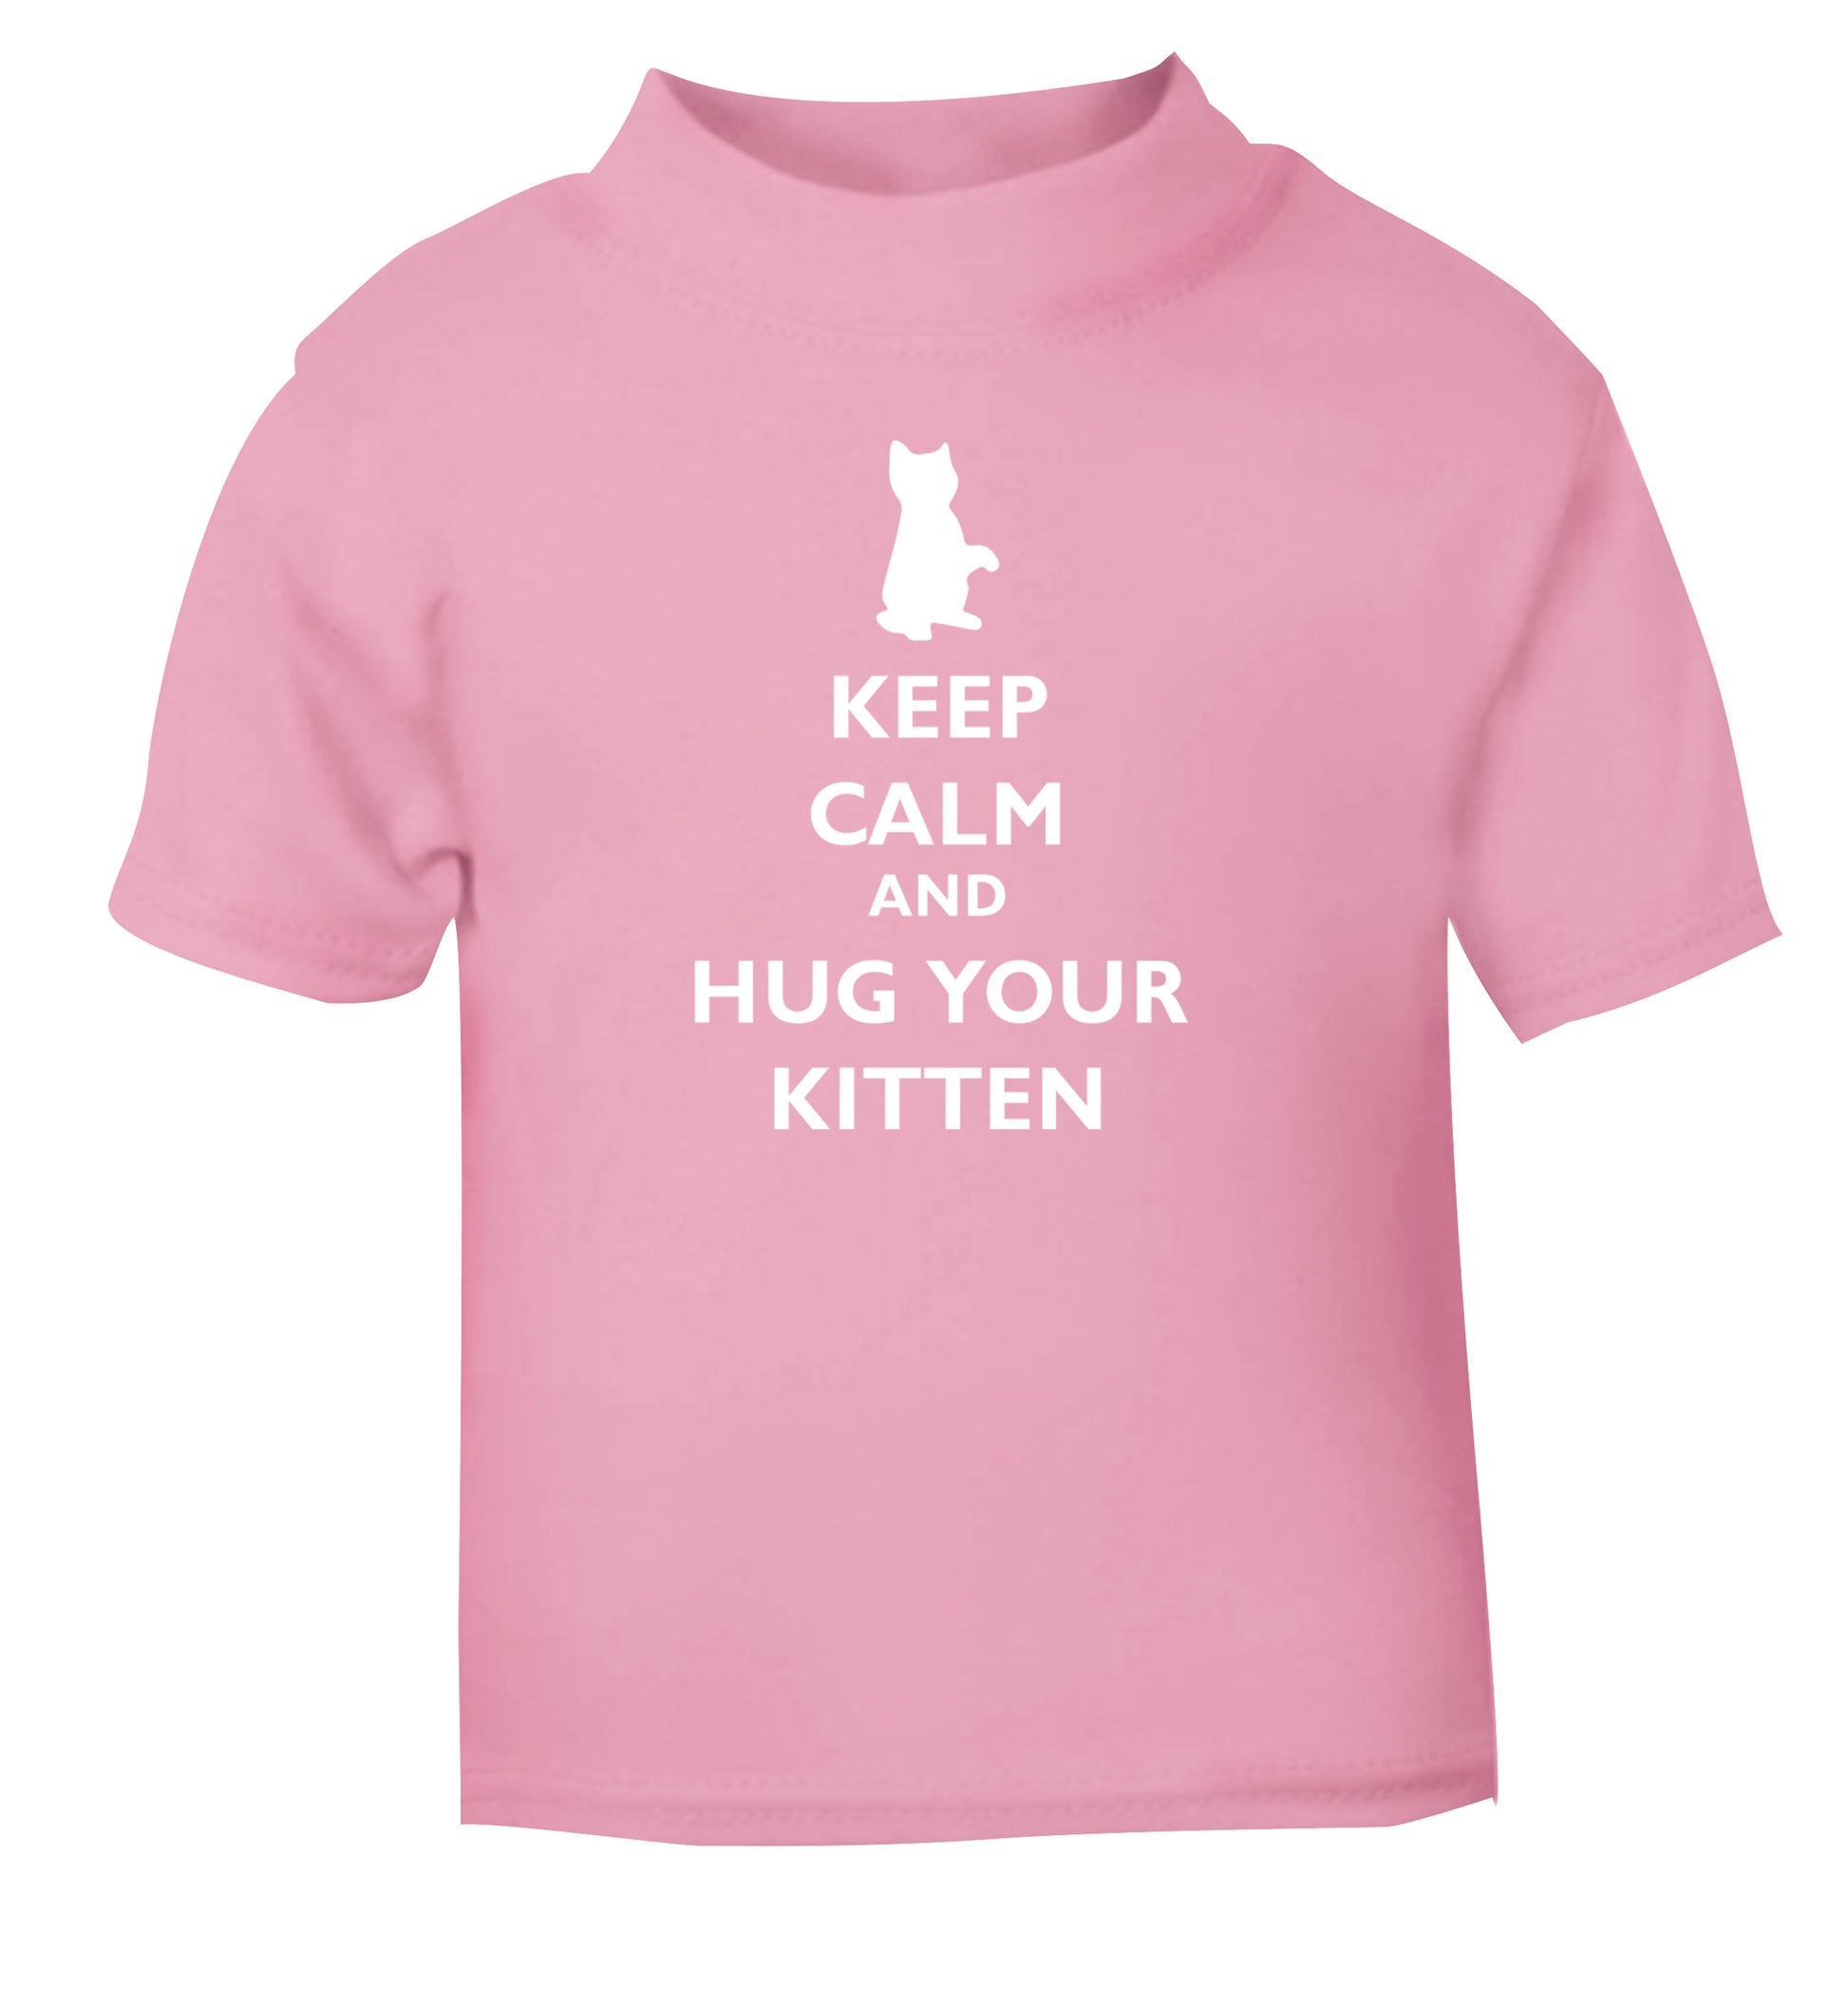 Keep calm and hug your kitten light pink Baby Toddler Tshirt 2 Years